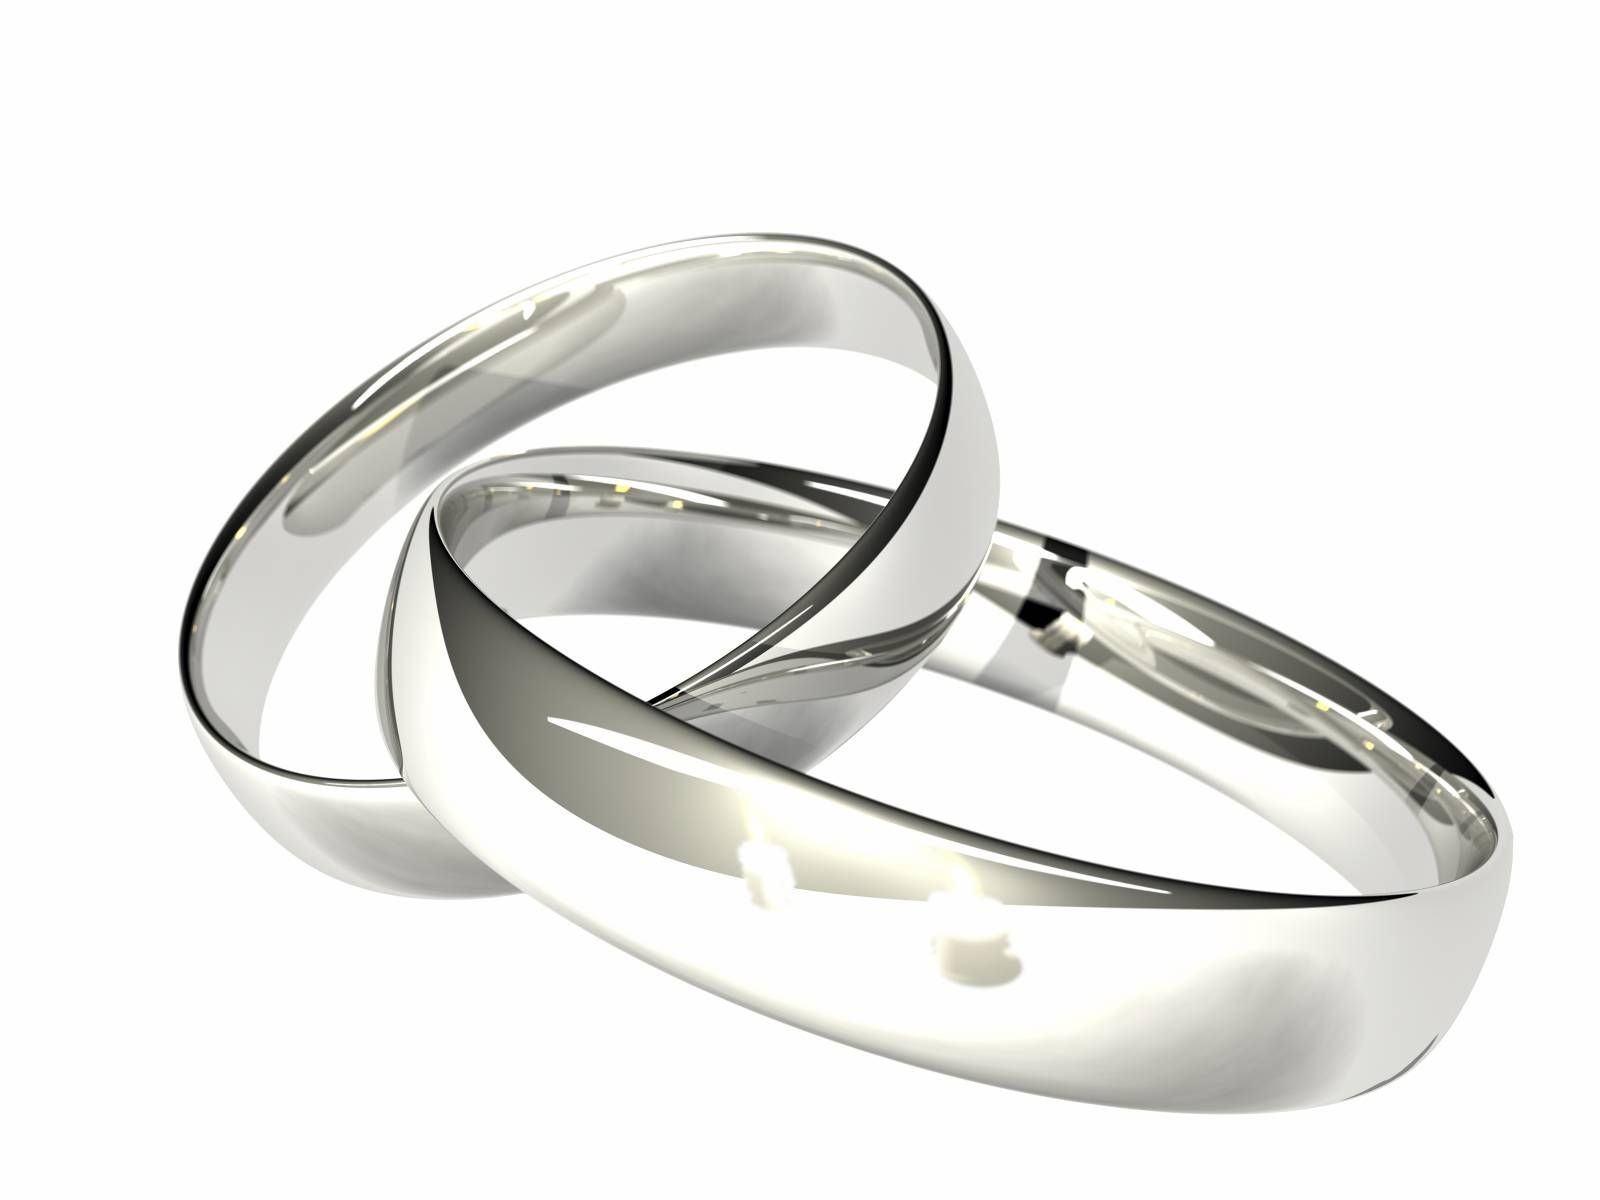 New 25th Wedding Anniversary Rings | Topup Wedding Ideas Regarding Most Recent 25th Wedding Anniversary Rings (View 3 of 25)